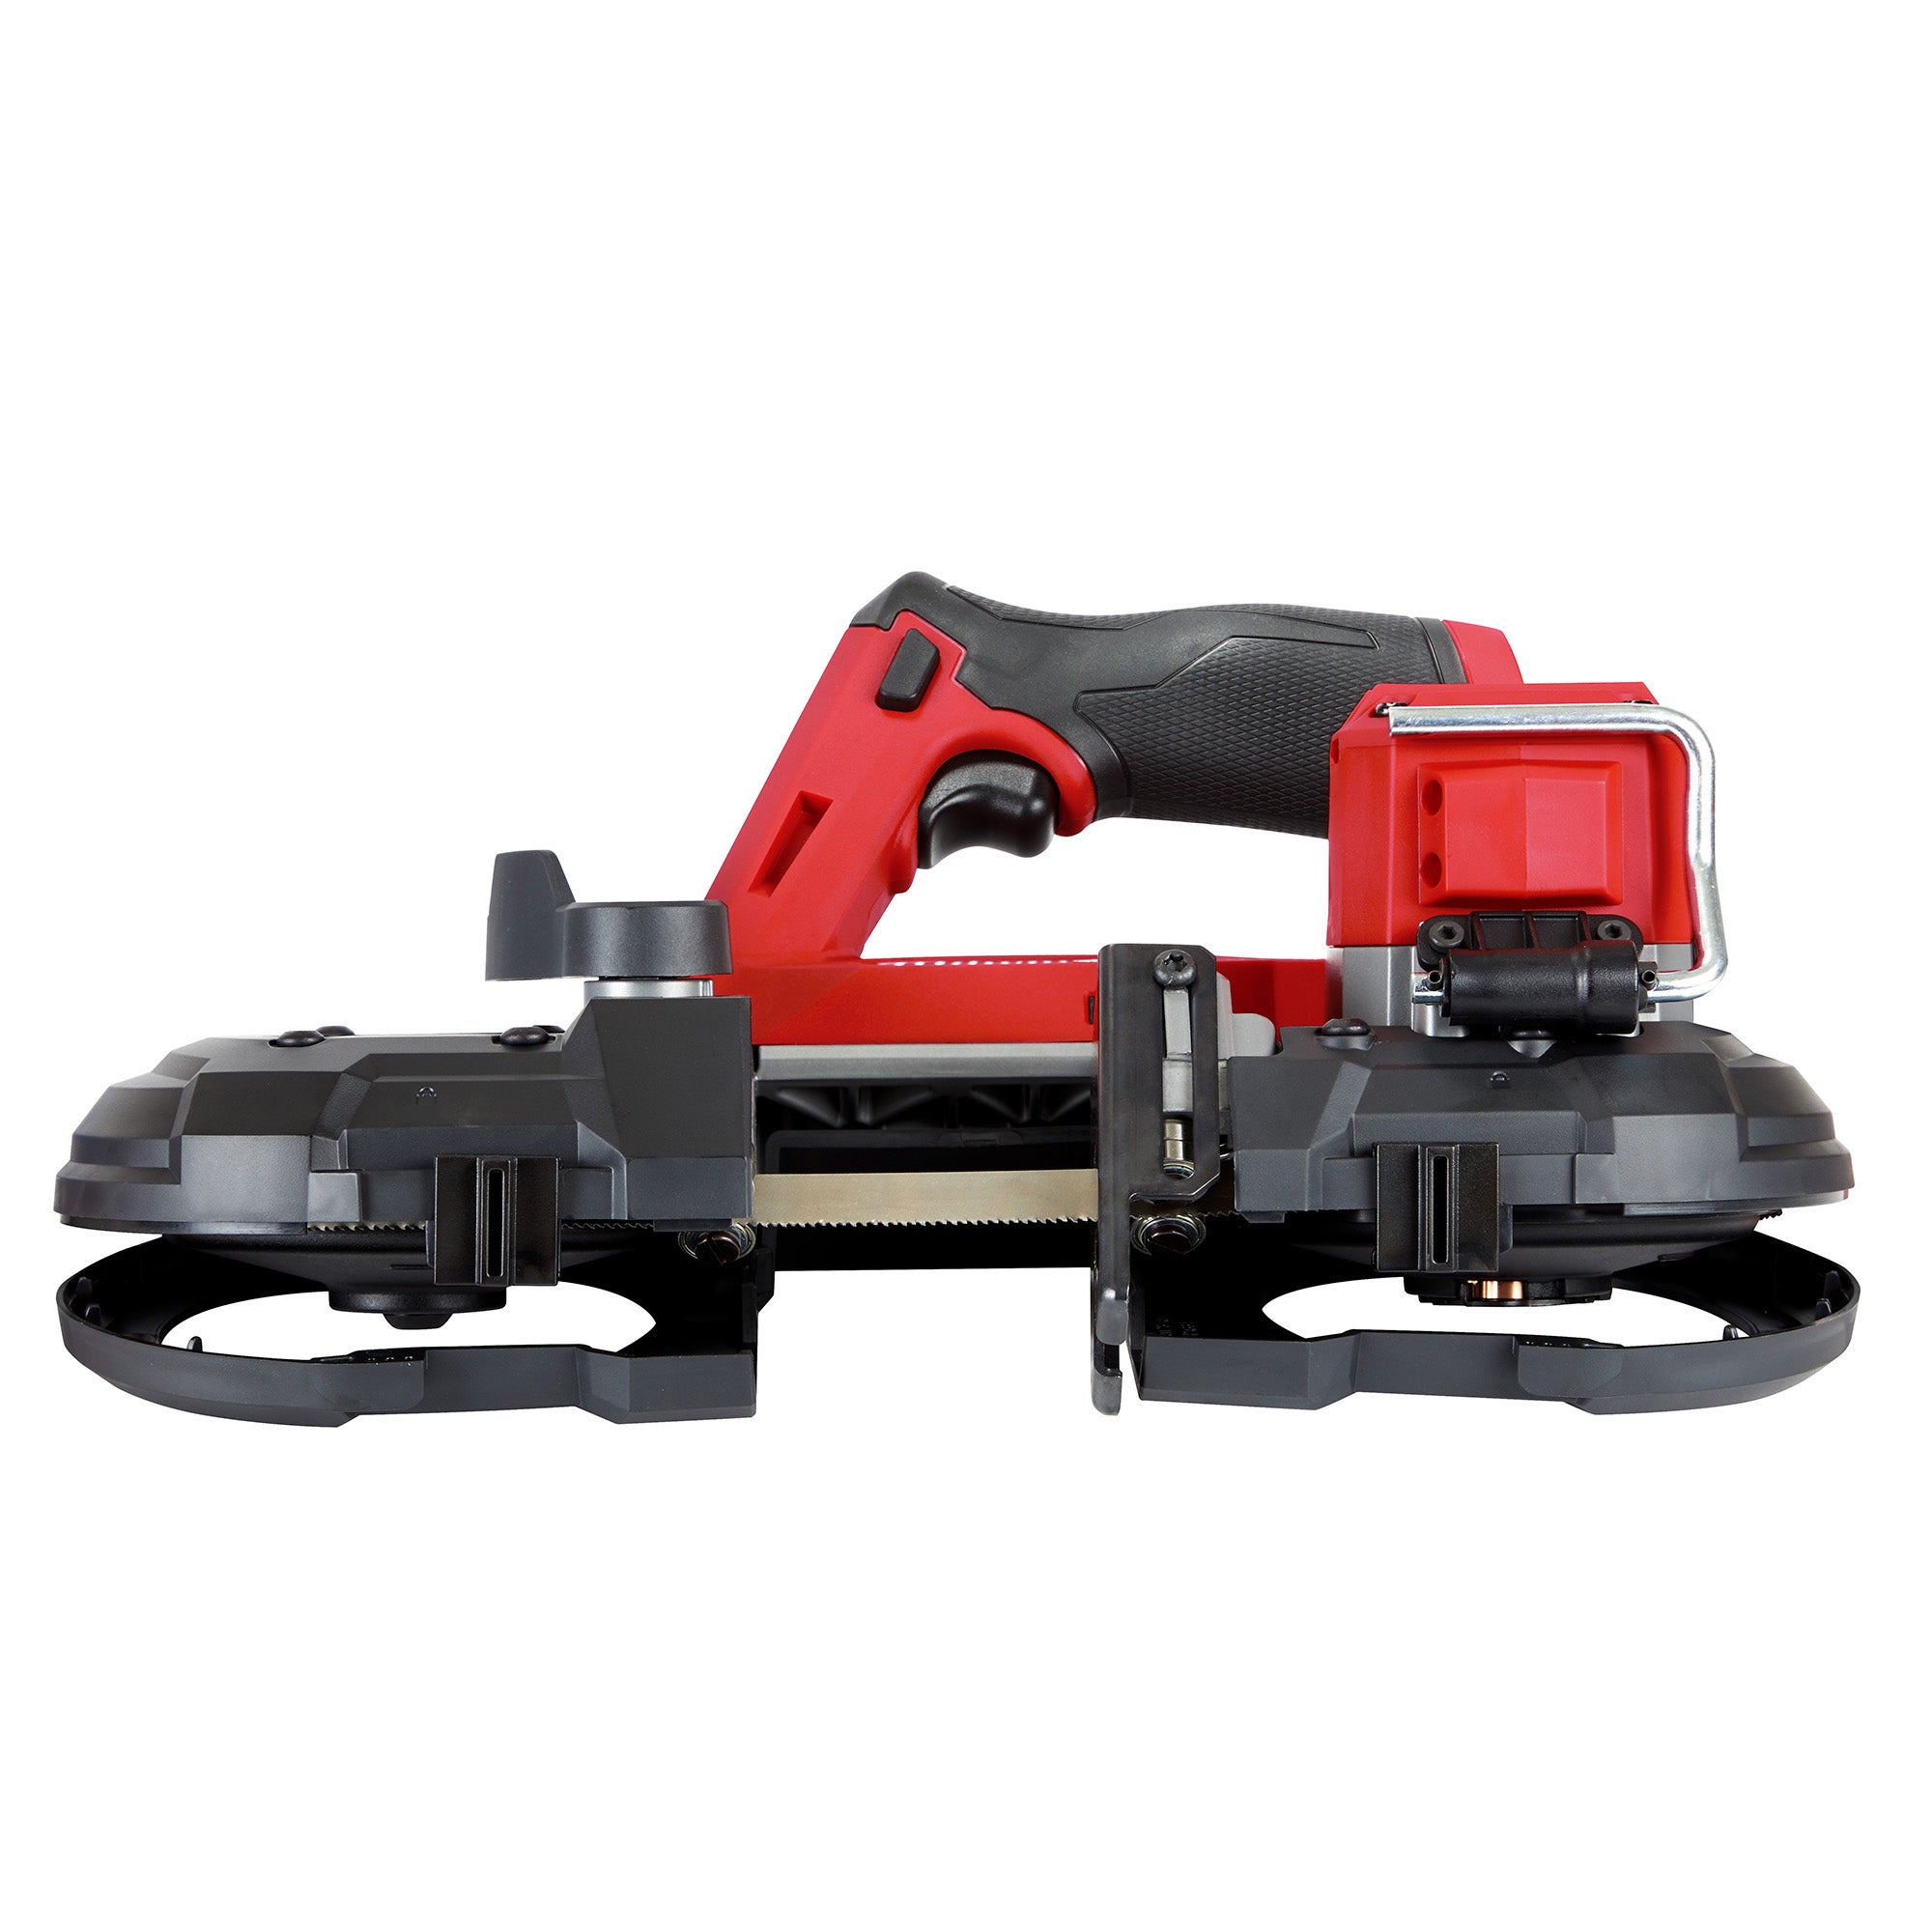 12V M12 FUEL Lithium-Ion Brushless Cordless Compact Band Saw (Tool Only)